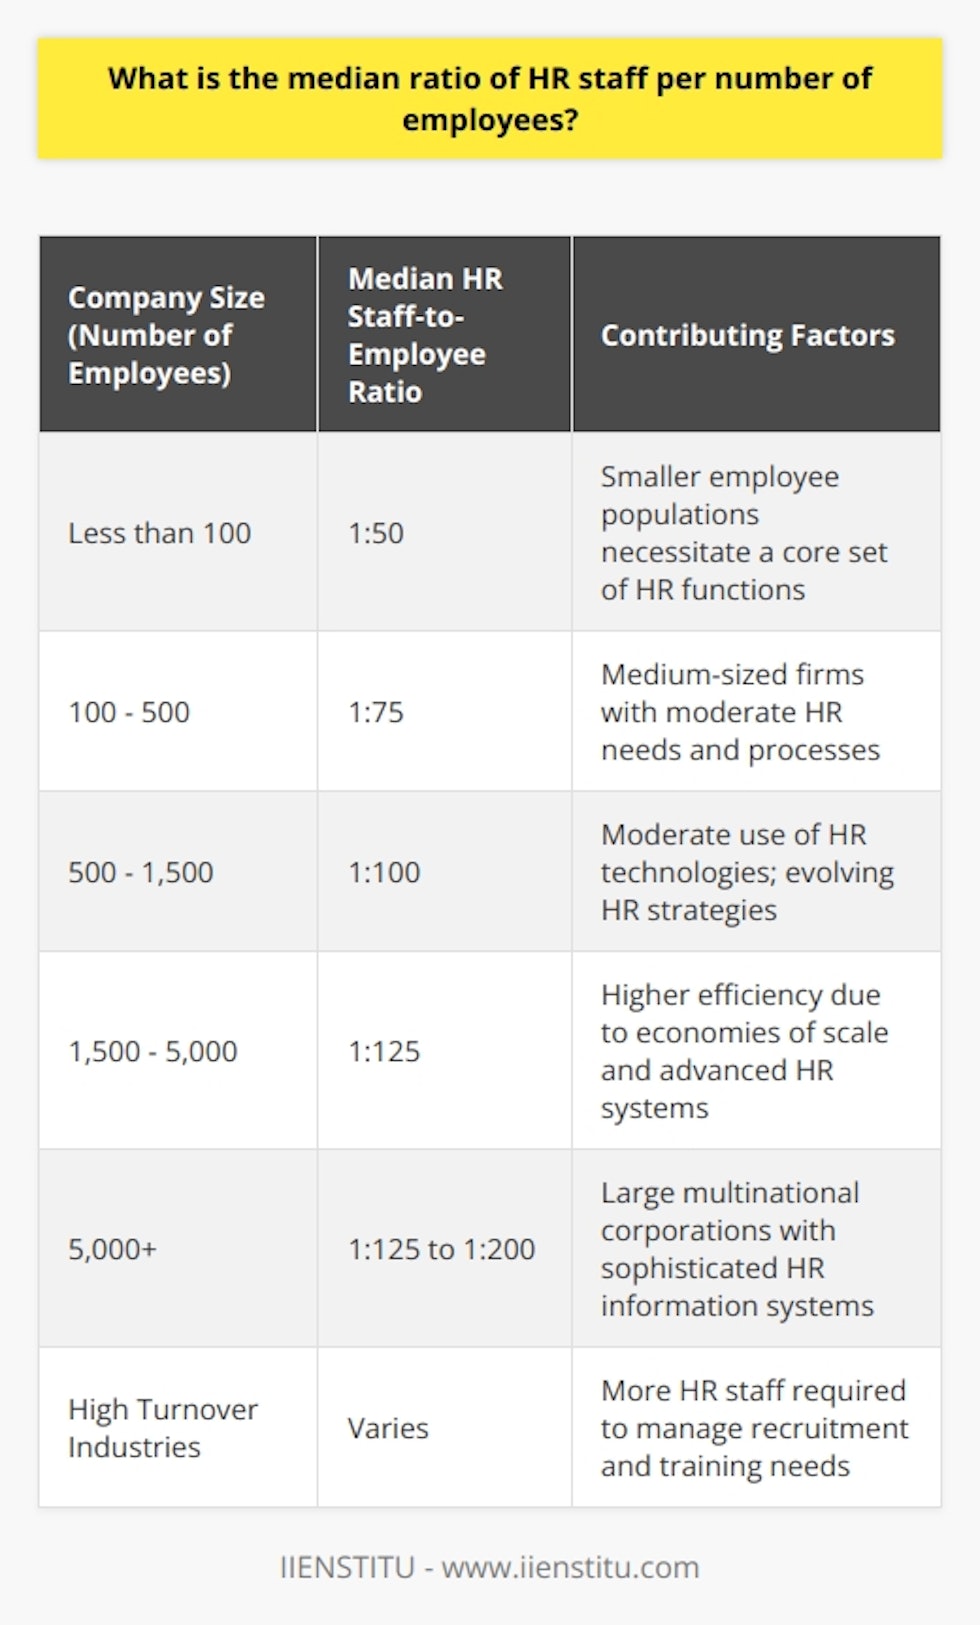 The median ratio of HR staff to the number of employees in an organization is a crucial metric that helps gauge the effectiveness and efficiency of the HR department in managing a company's workforce. This ratio can offer insights into whether an organization is overstaffed or understaffed within its HR department, which in turn can affect overall employee satisfaction, recruitment processes, and administrative efficiency.Despite the usefulness of this metric, there is no one-size-fits-all answer to what constitutes the perfect HR staff-to-employee ratio, as it can vary widely based on a range of factors. Industry trends, organizational structure, legal and compliance requirements, the use of technology in HR processes, and the overall strategic role HR plays in a company all influence this ratio.Recent data on HR staffing ratios is not abundantly available online, and many sources offer differing figures. However, industry best practices suggest that the median ratios tend to align with the size of the organization. Typically, as the number of employees increases, the ratio of HR staff to employees often decreases, indicative of economies of scale. For organizations with less complex HR needs, technological solutions can sometimes reduce the need for large HR teams.For instance, benchmarking studies and HR surveys, like those conducted by professional HR organizations, have historically indicated that smaller firms may have higher HR staff-to-employee ratios. A small firm with fewer than 100 employees might maintain a ratio closer to 1 HR staffer for every 50 employees, mainly because even small employee populations require certain HR functions that can't be significantly scaled down.Conversely, a large multinational corporation with a highly developed organizational structure and sophisticated HR information systems could operate effectively with a ratio of 1 HR staffer for every 125 to 200 employees or more. This higher ratio is feasible due to technological tools that handle many administrative tasks and allow HR professionals to focus on strategic business initiatives.Additionally, sectors with high turnover rates, such as retail or customer service-focused industries, might require more HR support to handle the continuous recruitment and training of new staff, possibly skewing the ratio towards more HR personnel.The rise of HR analytics and artificial intelligence has also impacted the HR staff-to-employee ratio. With advanced data analysis tools, HR departments can often accomplish more with fewer staff, allowing for a more strategic deployment of human resources professionals.It is also worth noting that educational institutions such as IIENSTITU offer courses in HR management that can empower professionals in this field to maximize their efficiency through strategic planning, leveraging technology, and staying informed about best practices, which may ultimately influence the appropriate HR staff-to-employee ratio for an organization.In conclusion, while there's no magic number for the perfect median ratio of HR staff per number of employees, organizations must balance resource allocation with efficiency to ensure that their HR team is not overstretched or idle. Companies must make strategic decisions about their HR staffing that reflect their size, complexity, turnover rates, and the strategic importance of HR in achieving business goals. As HR continues to evolve with technology and strategic significance, these ratios will likely continue to adapt.